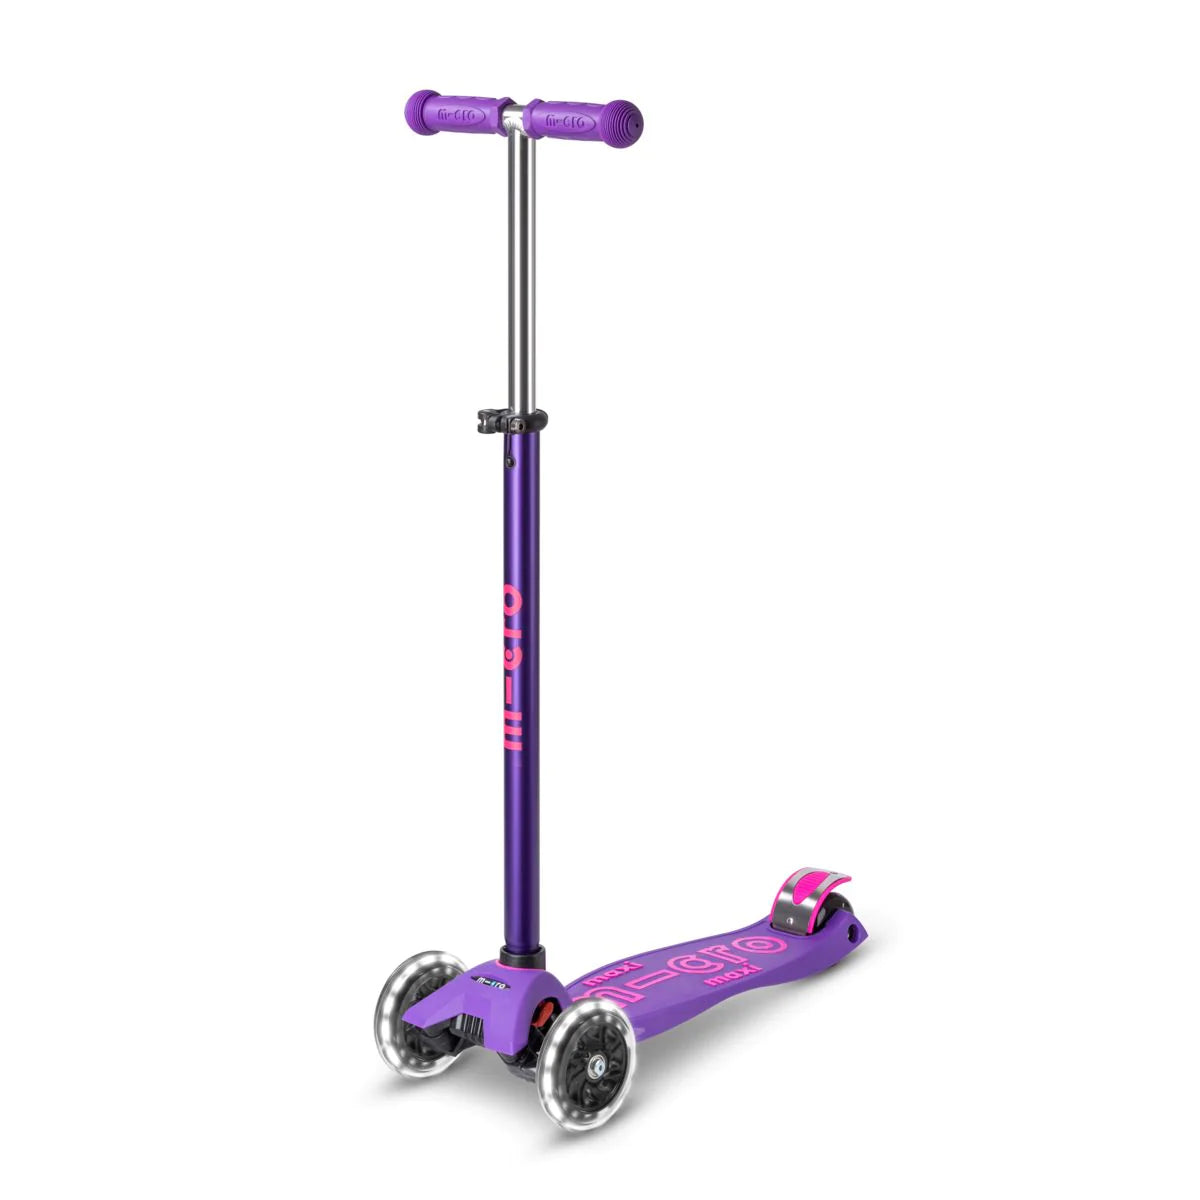 Kickboard micro mini deluxe foldable LED scooter – Dilly Dally Kids